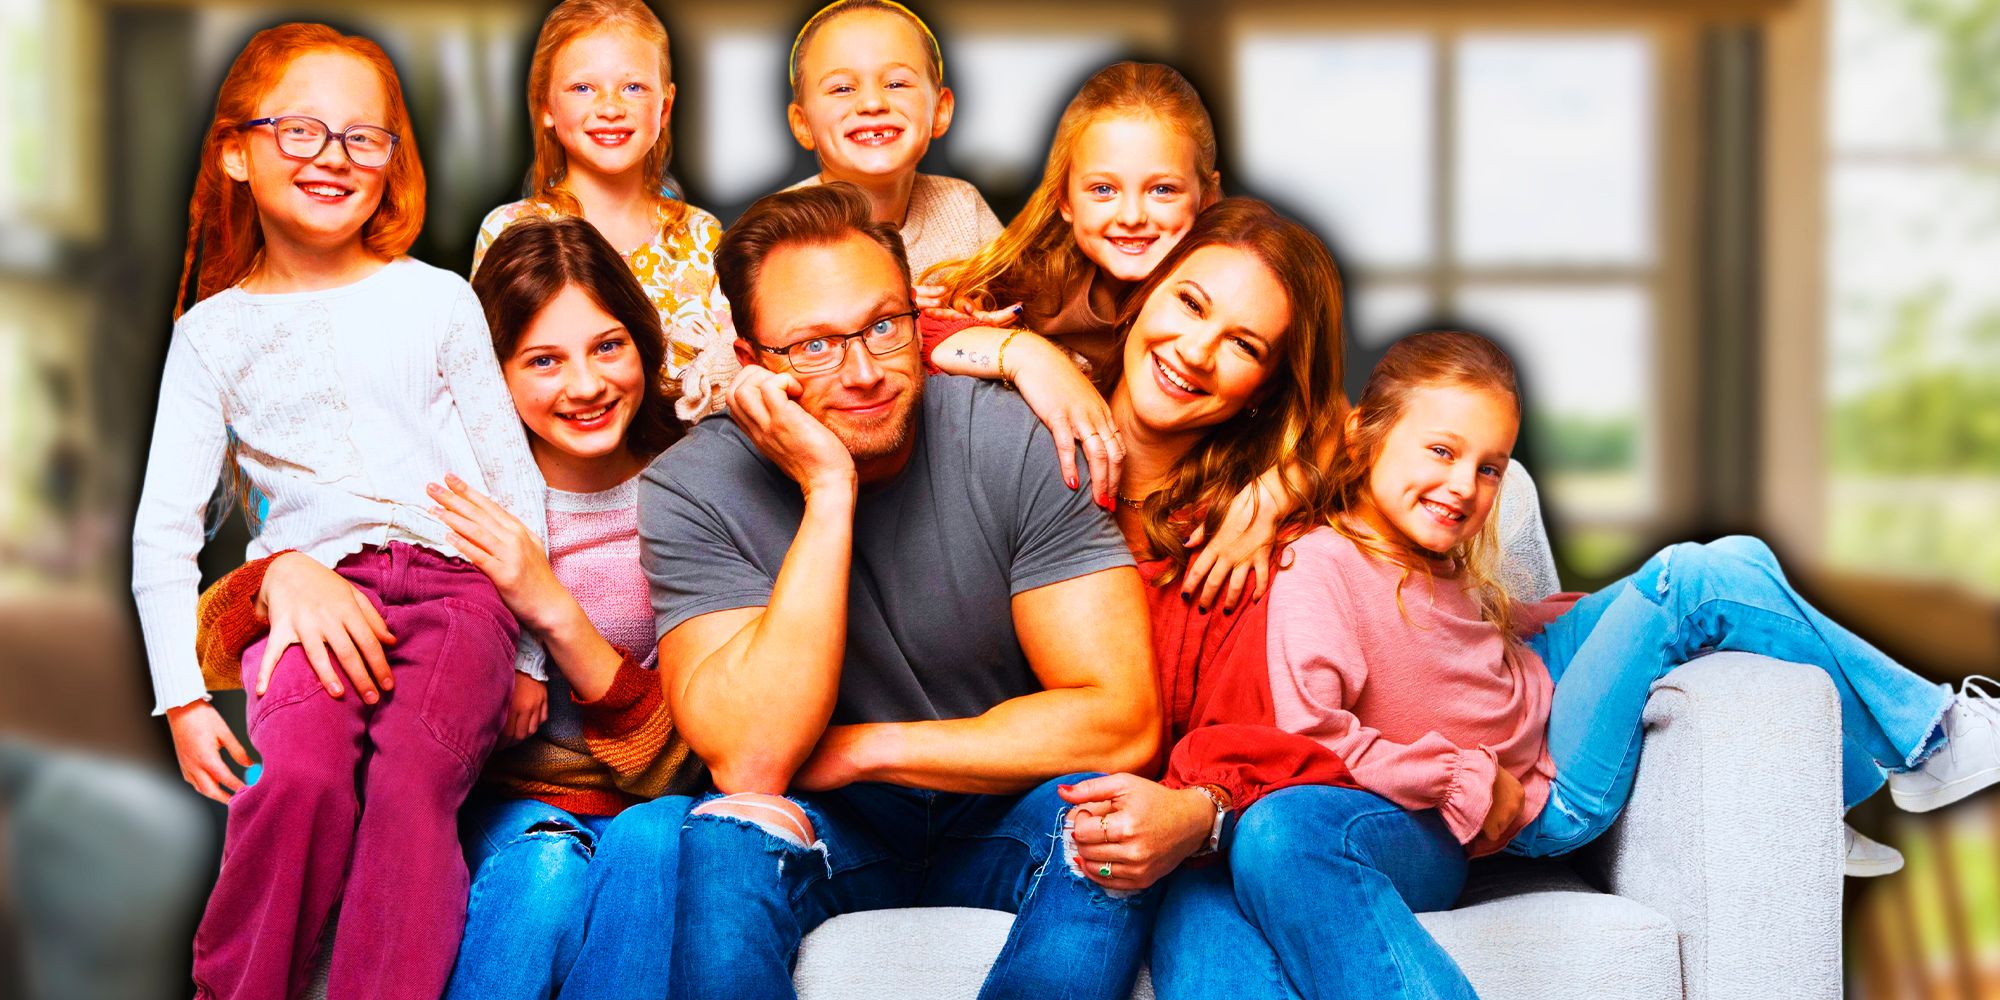 OutDaughtered cast members smiling